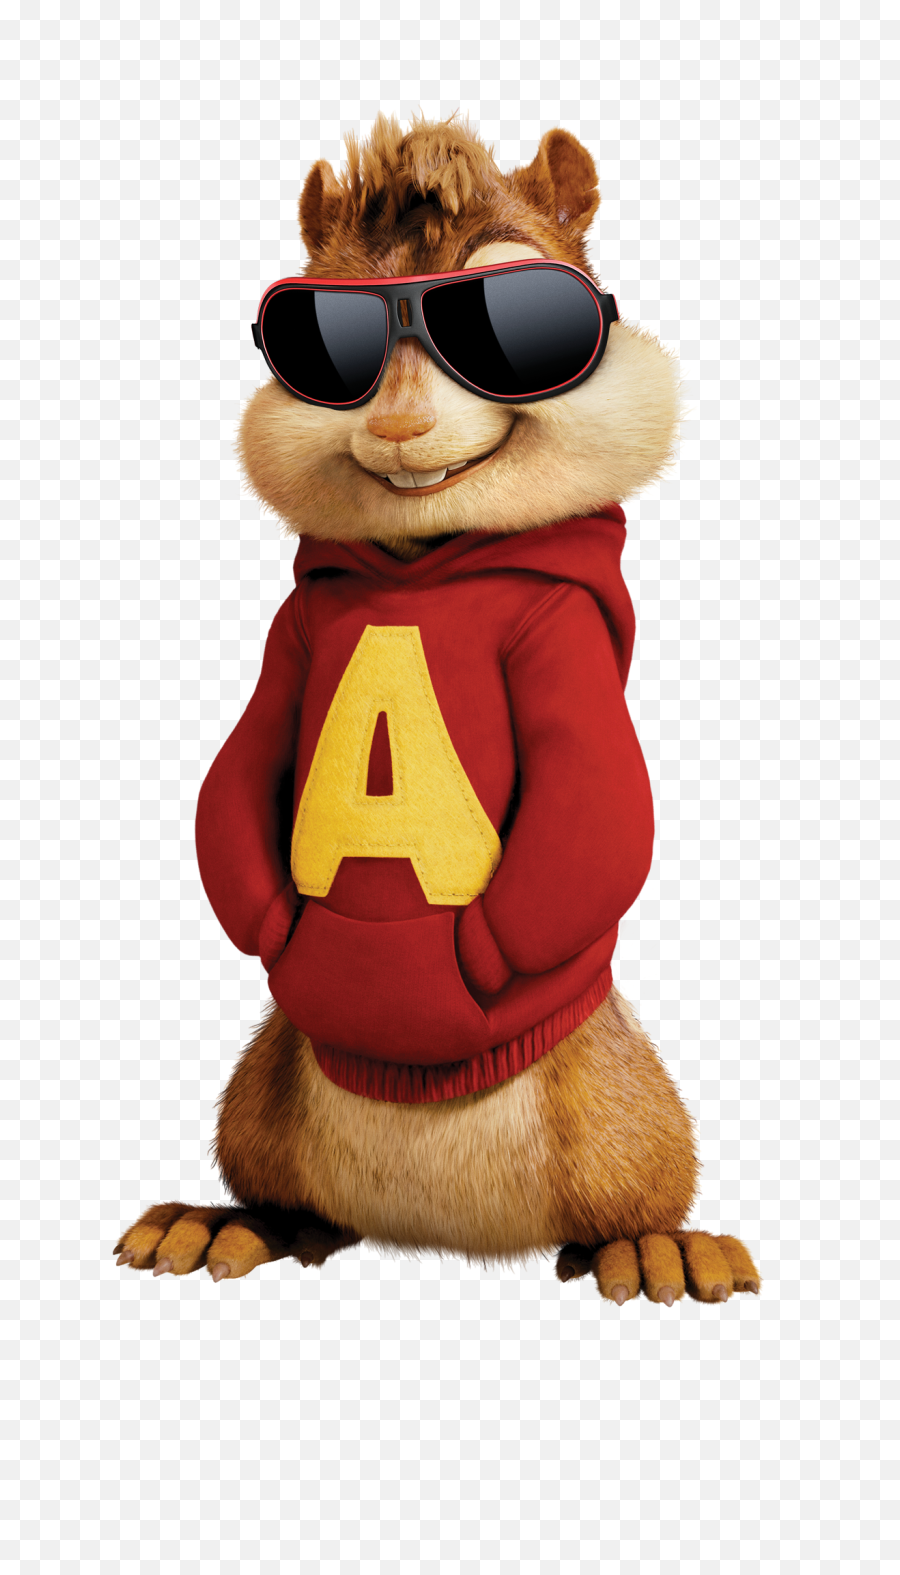 A Collection Of Amazing Alvin And The Chipmunks Goodies U0026 Toys - Alvin And The Chipmunks 2 Png,Cartoon Sunglasses Png